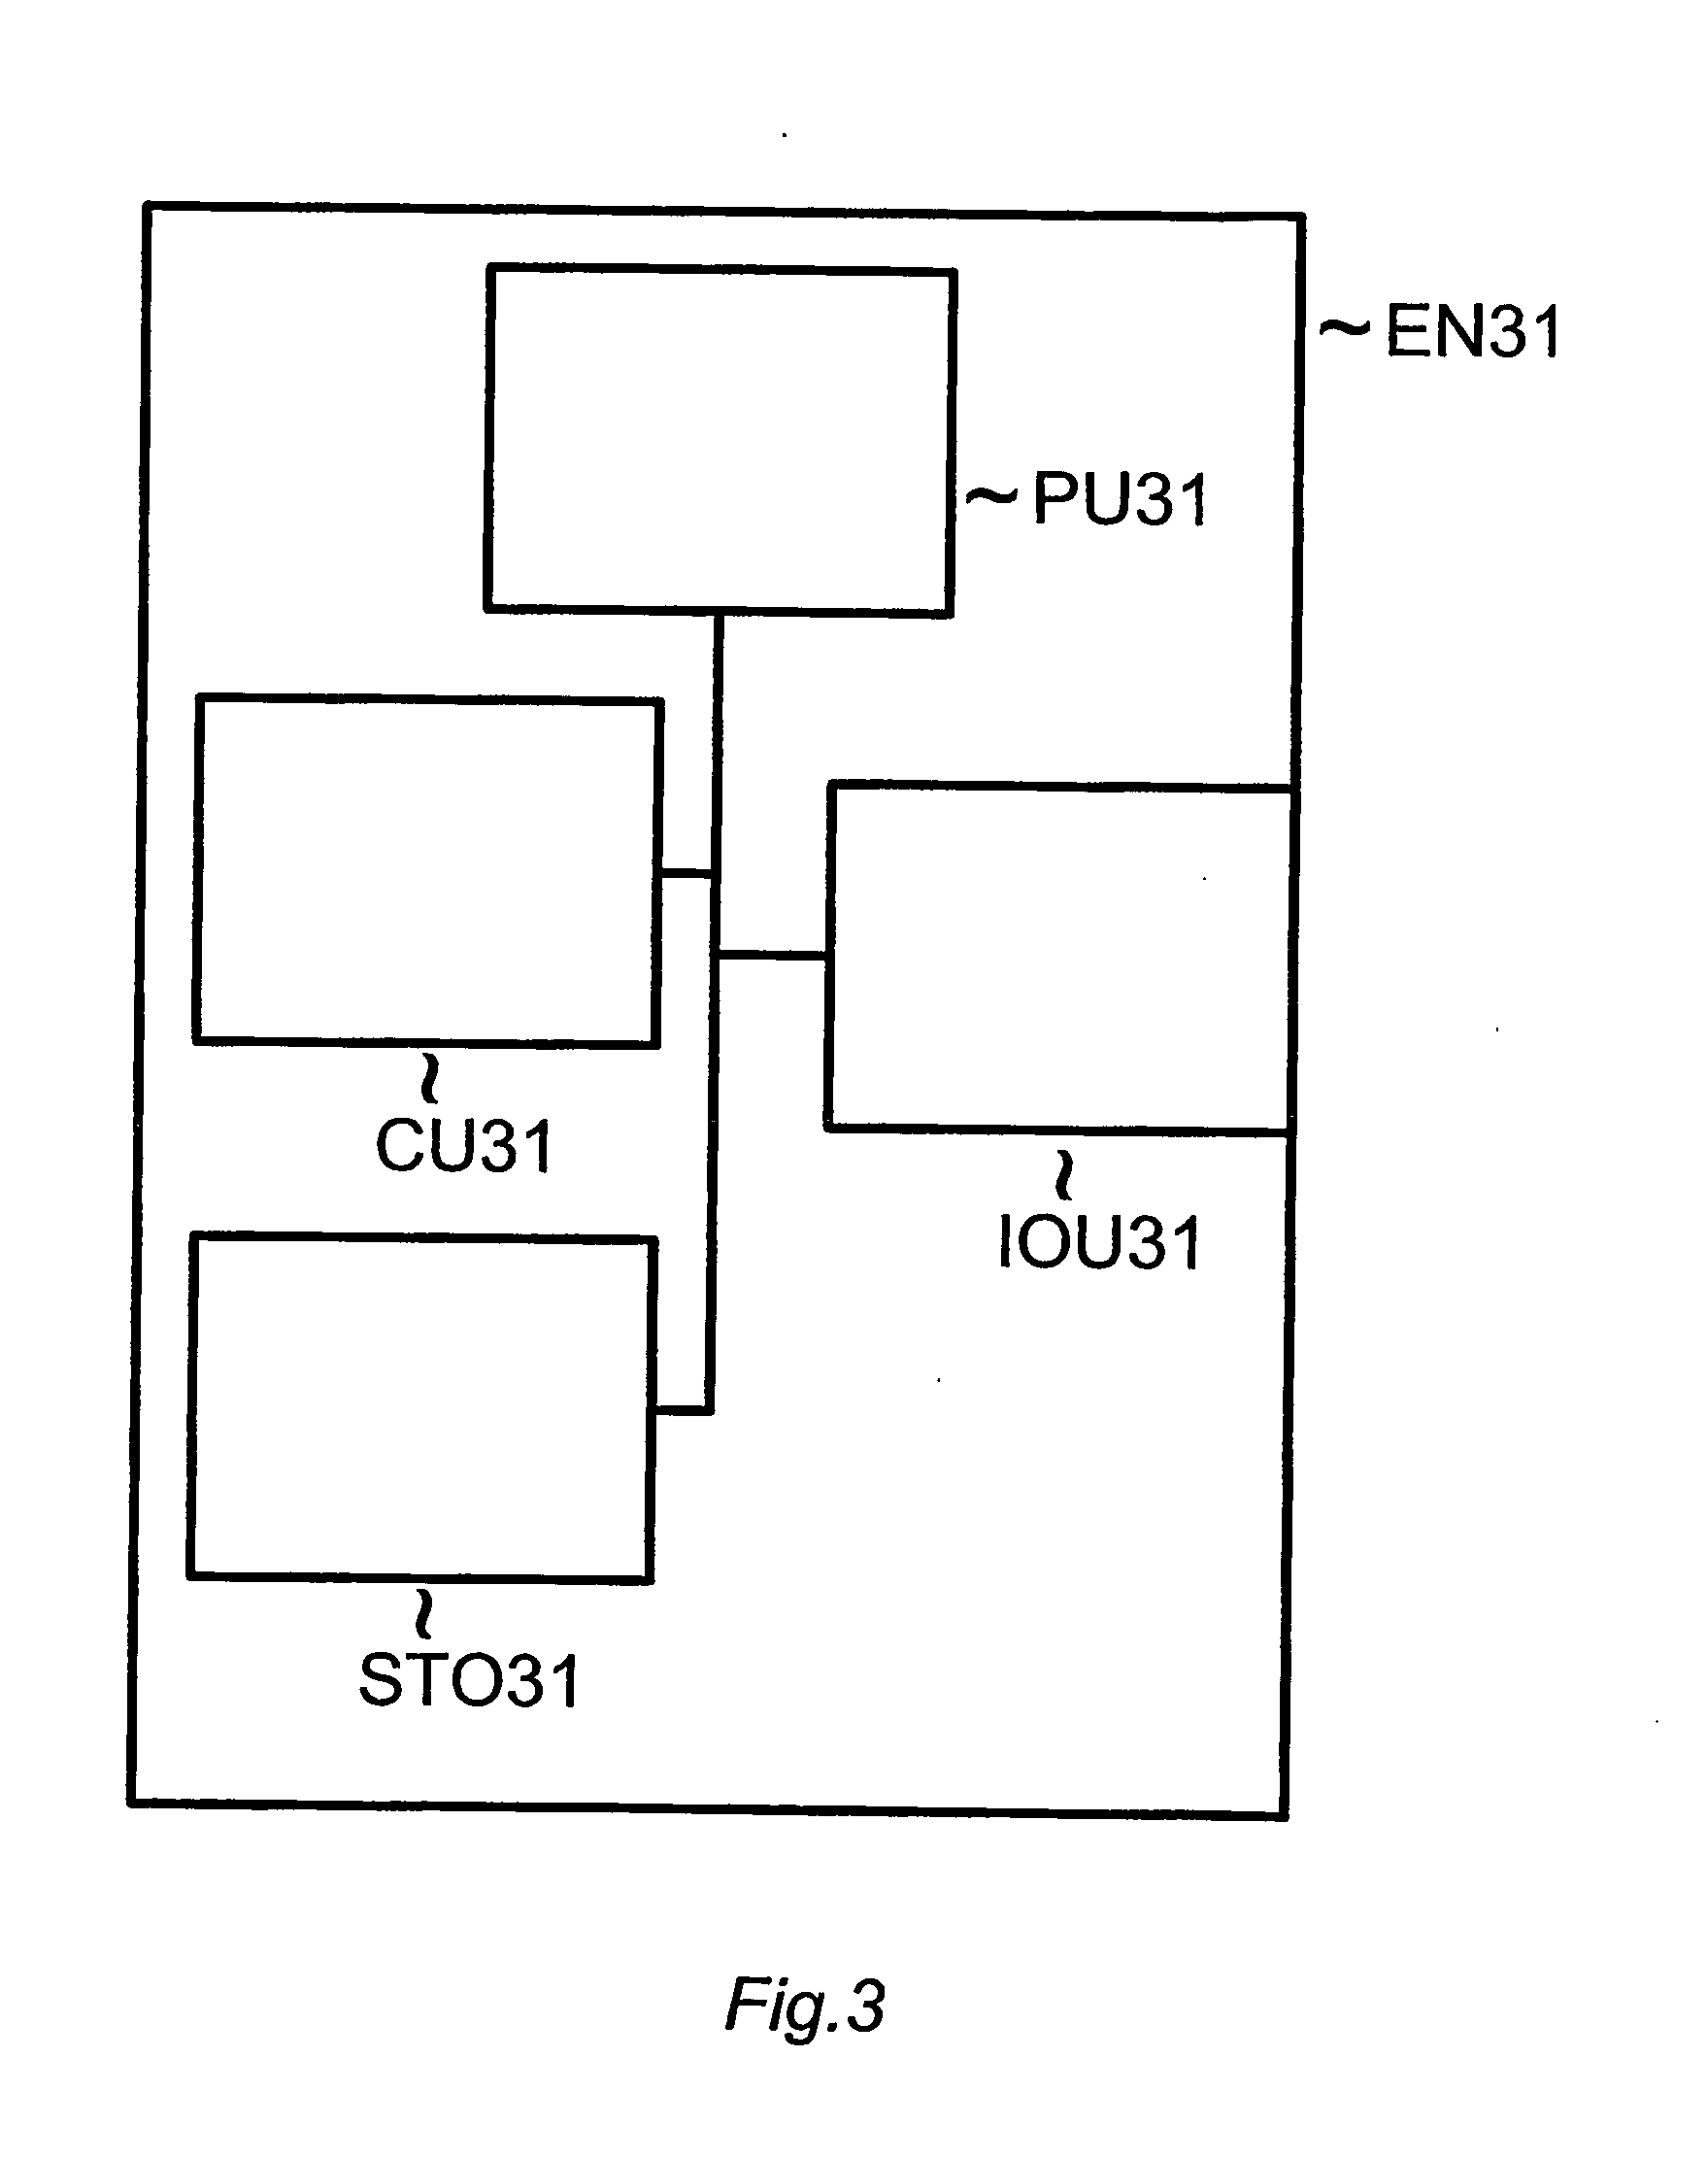 Method for the Distribution of a Network Traffic According to Sla and Qos Parameters